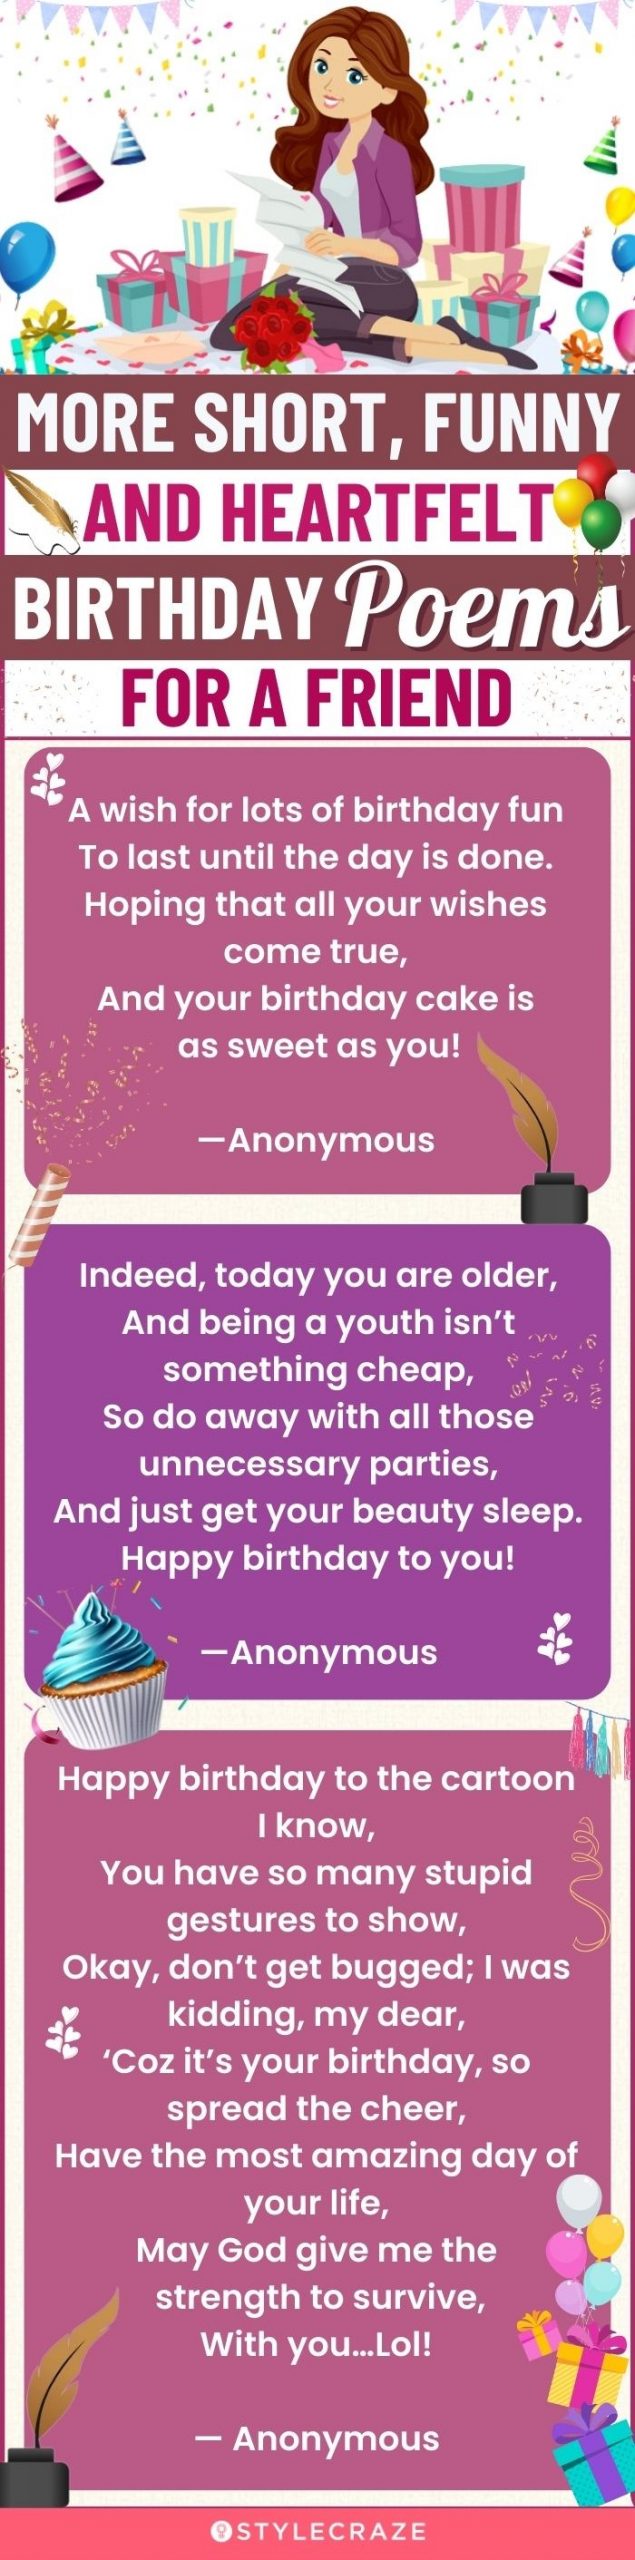 more short funny and heartfelt birthday poems for a friend (infographic)